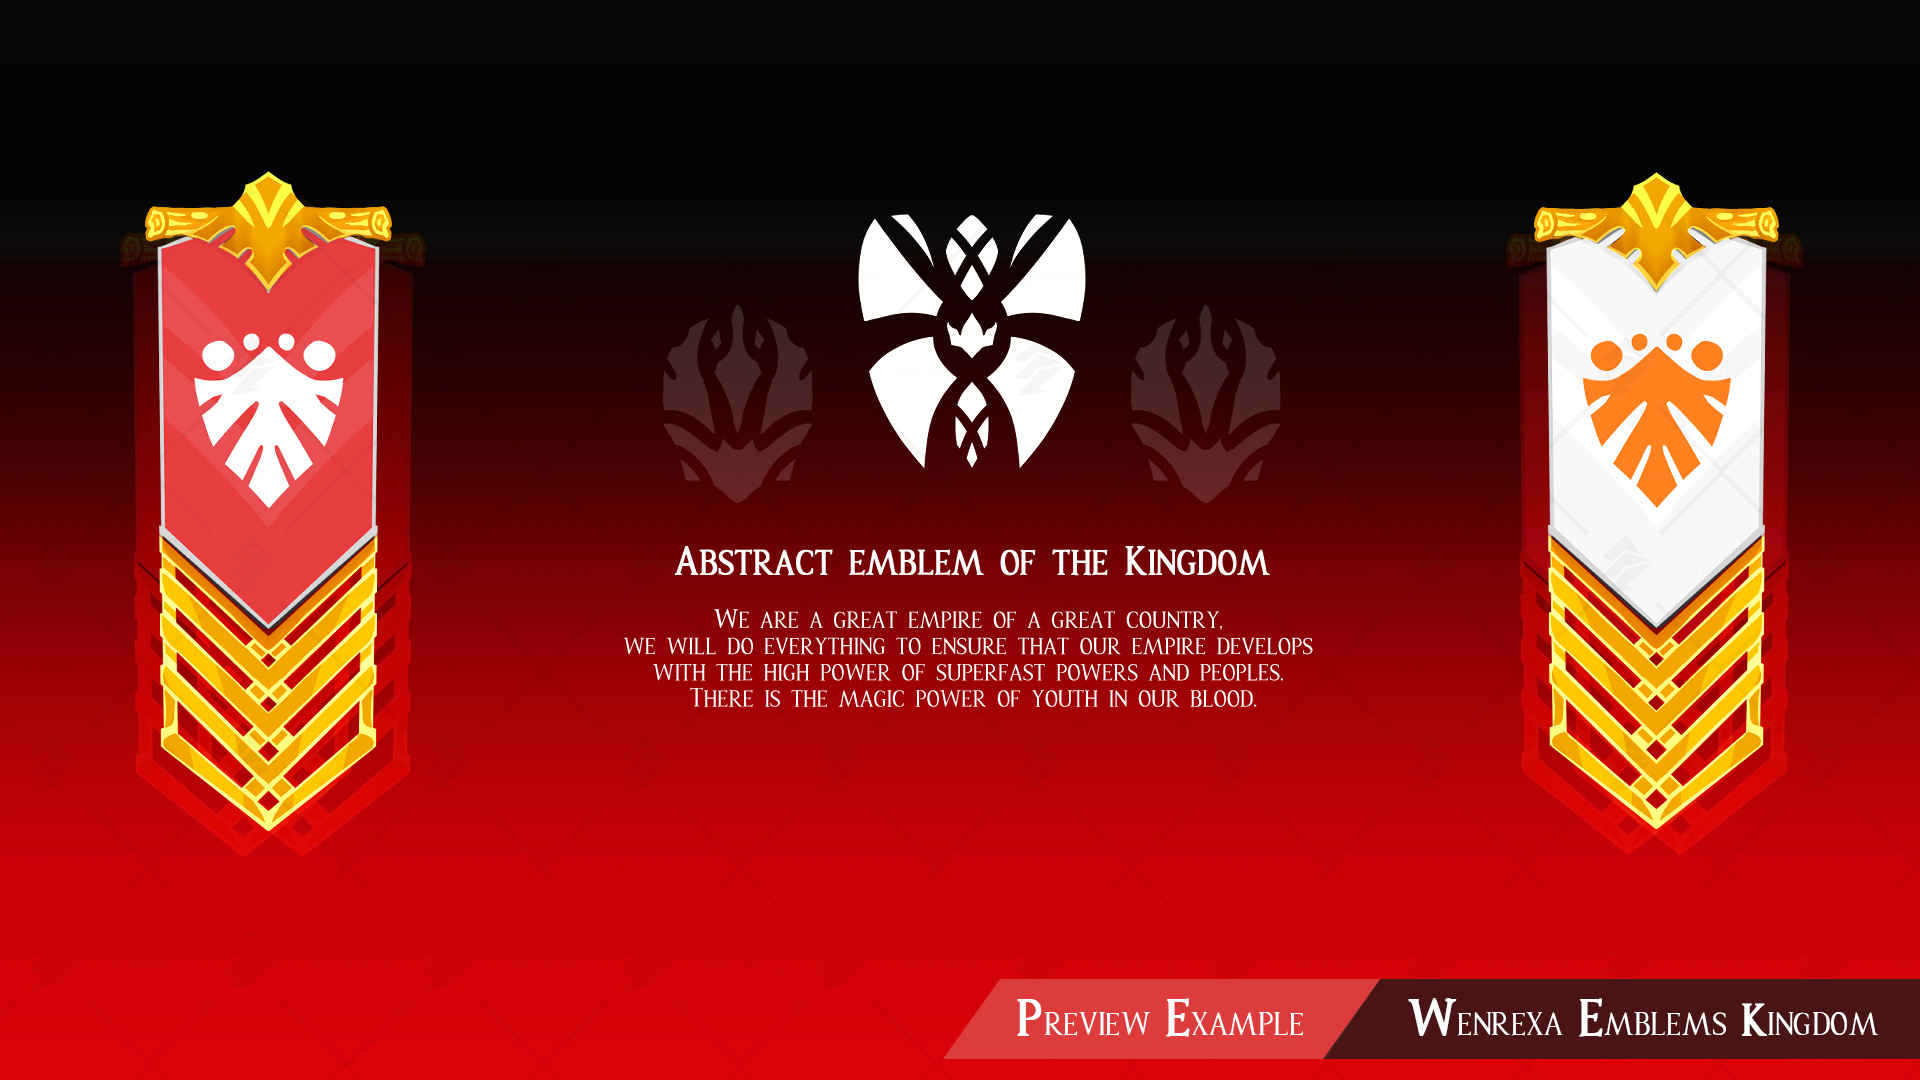 assets-emblems-of-the-kingdoms-by-wenrexa